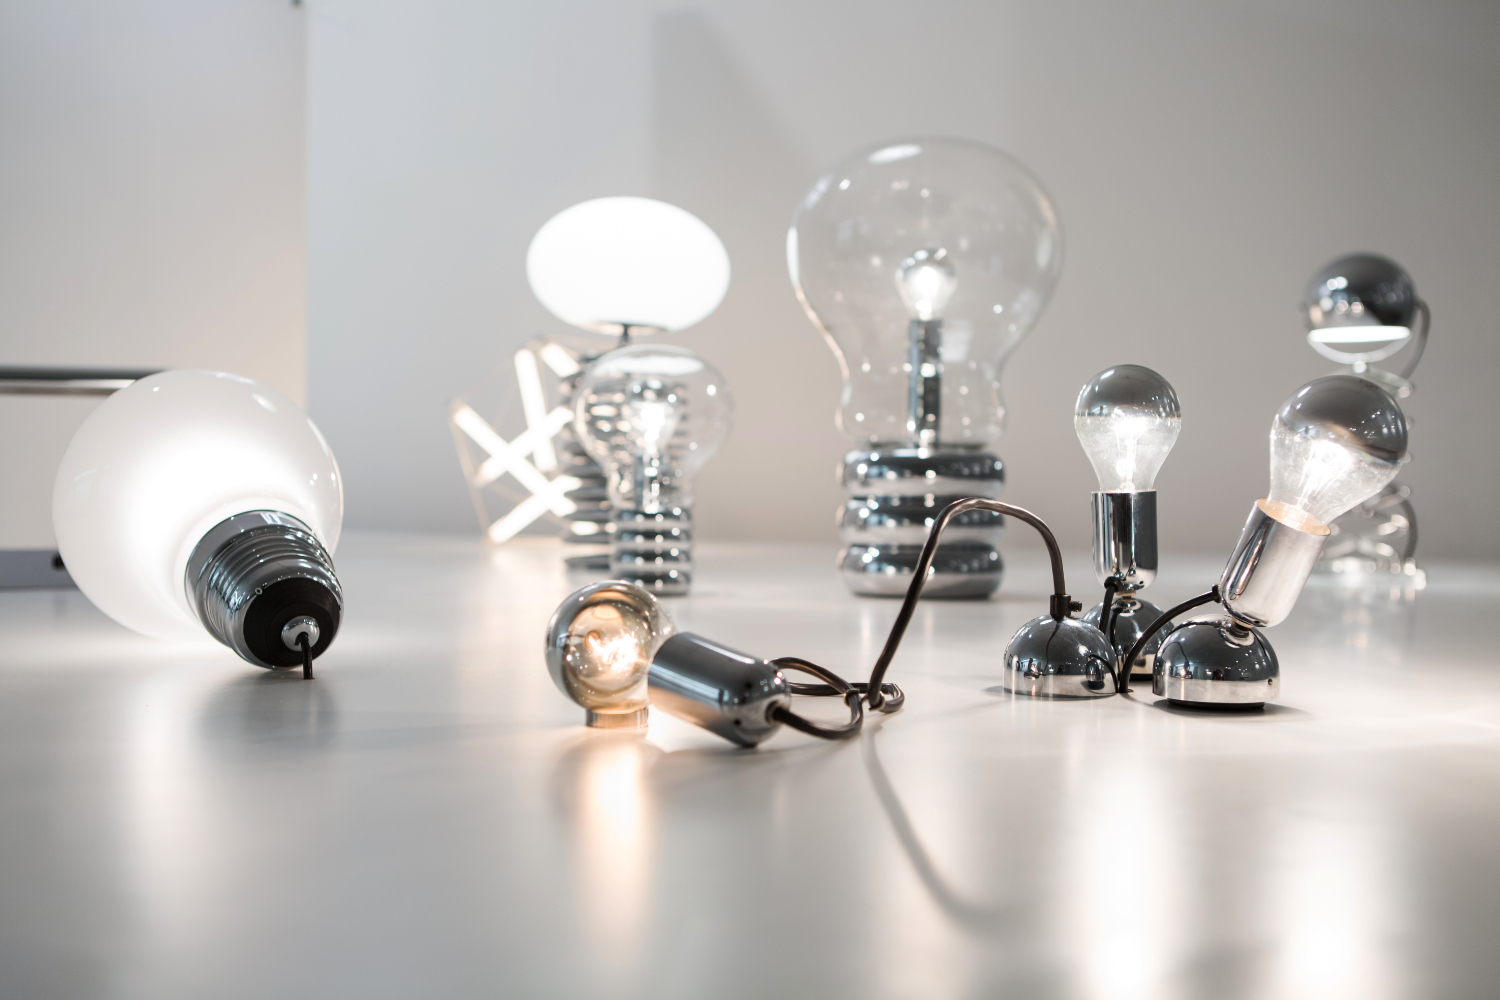 Several light bulb-shaped luminaires displayed next to each other